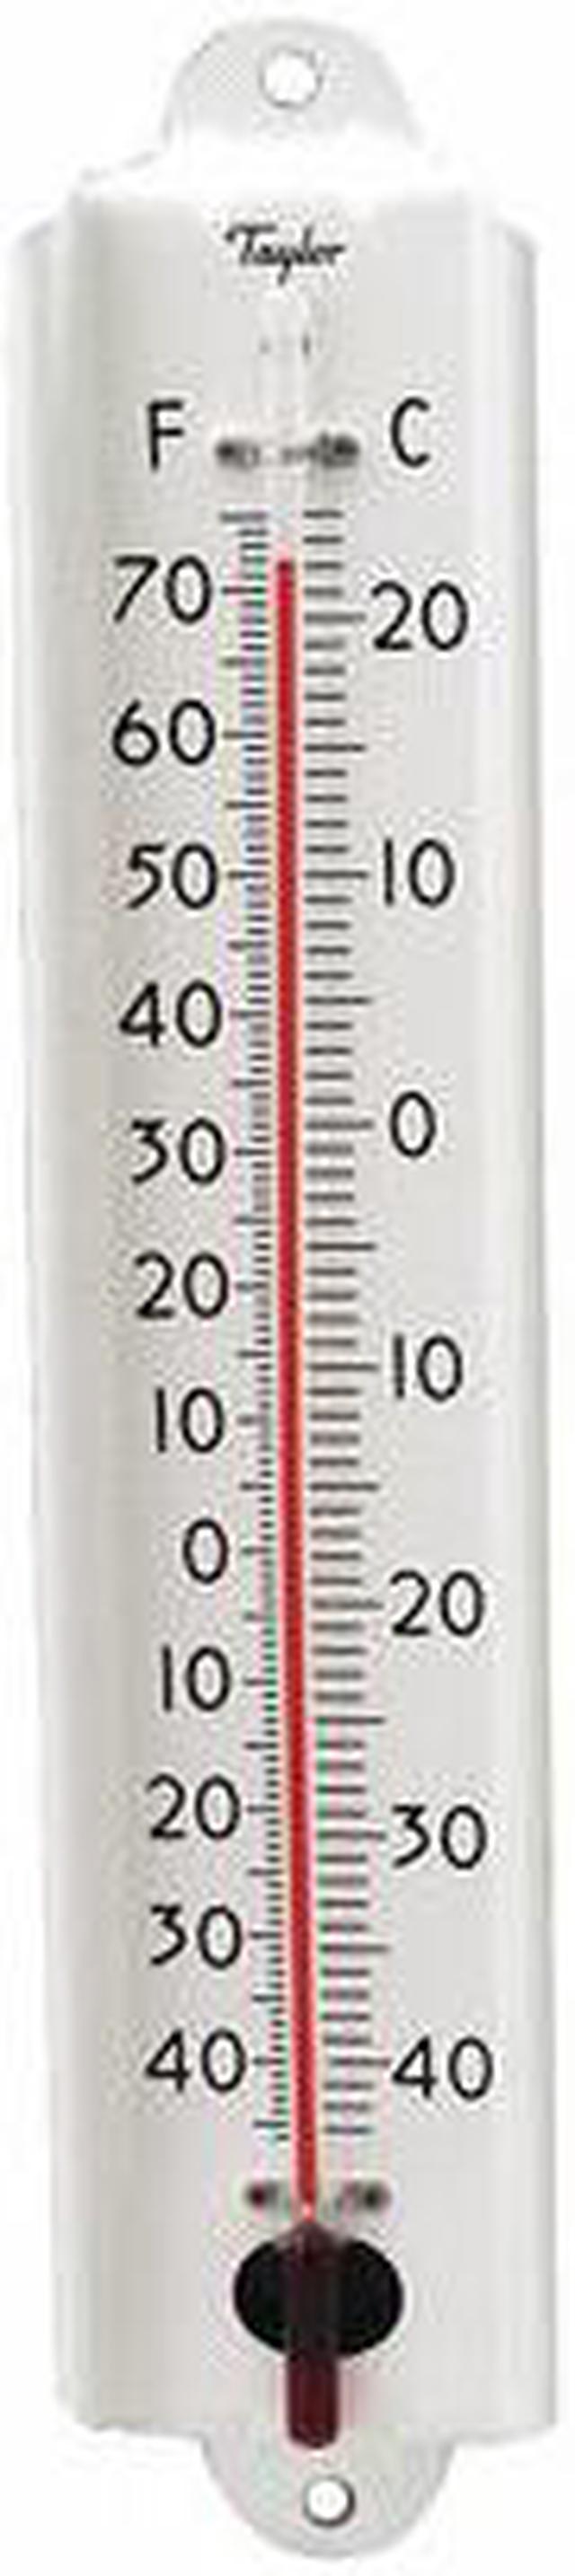 TAYLOR 1106 Analog Thermometer,-40 to 70 Degree F 